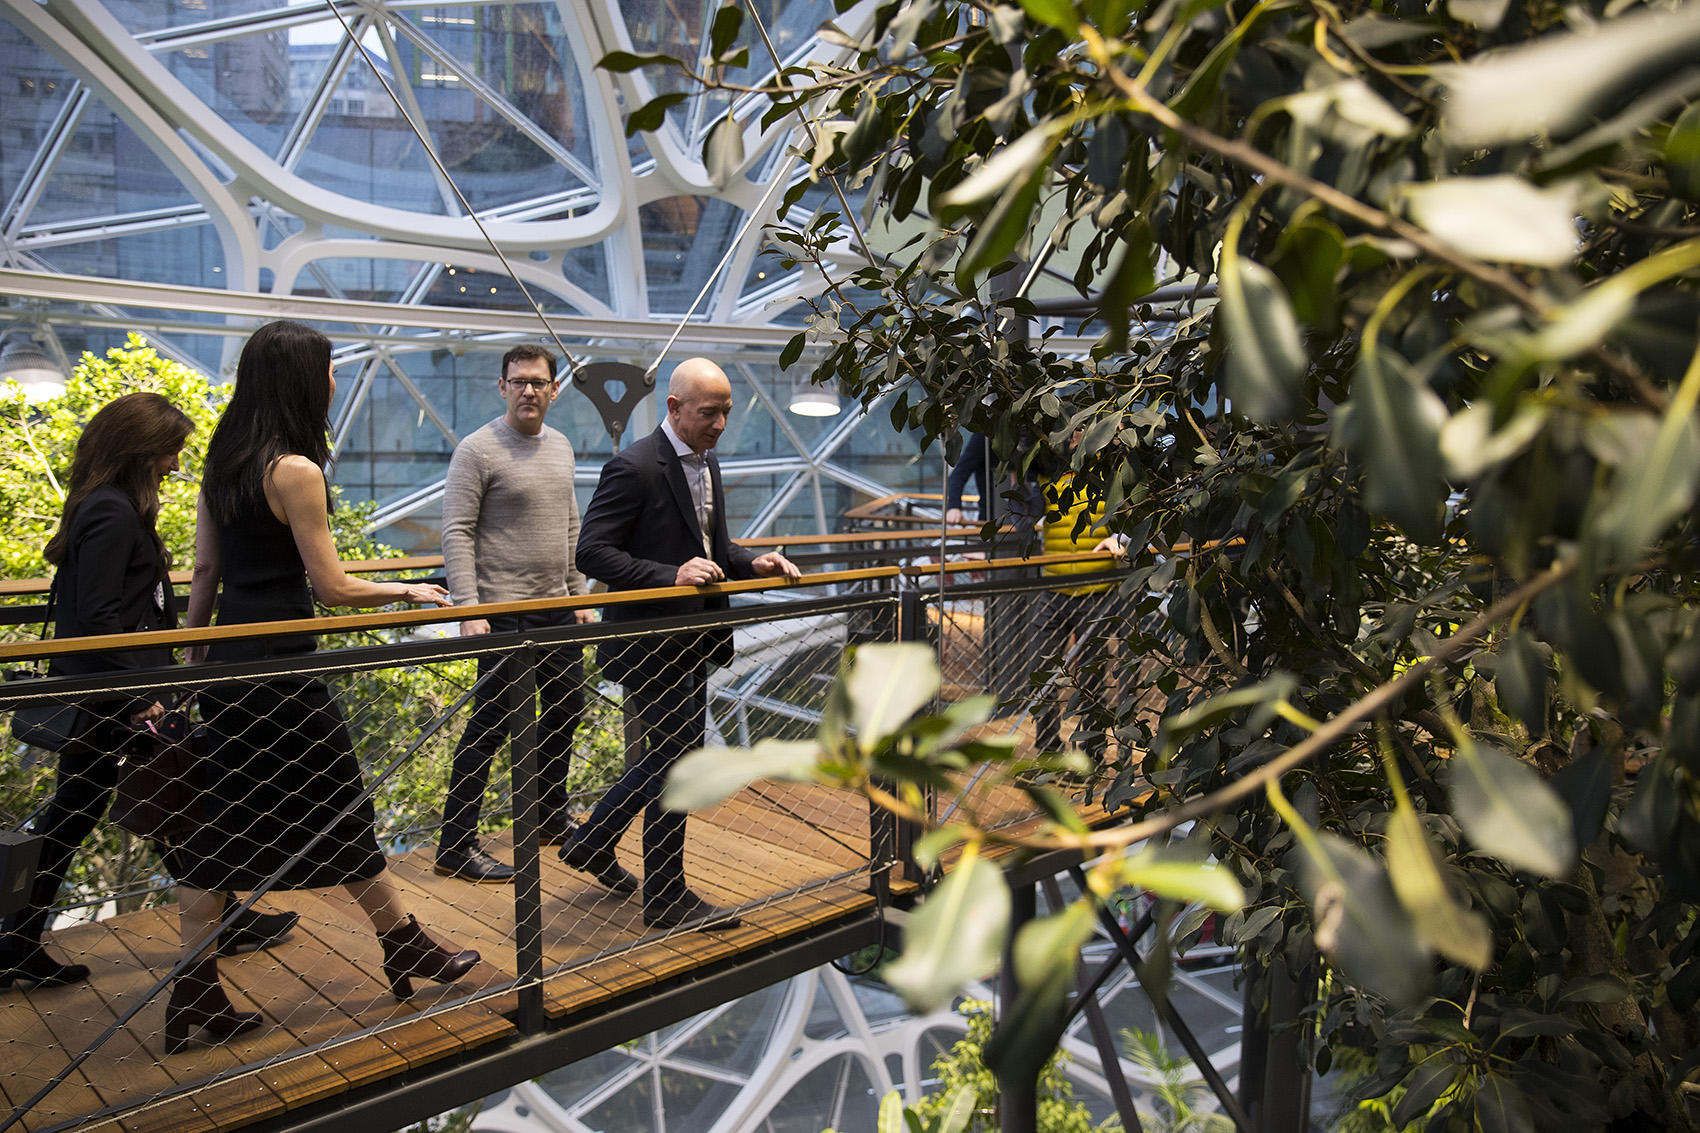 Jeff Bezos, right, tours The Spheres on Monday, January 29, 2018, during the grand opening in Seattle.